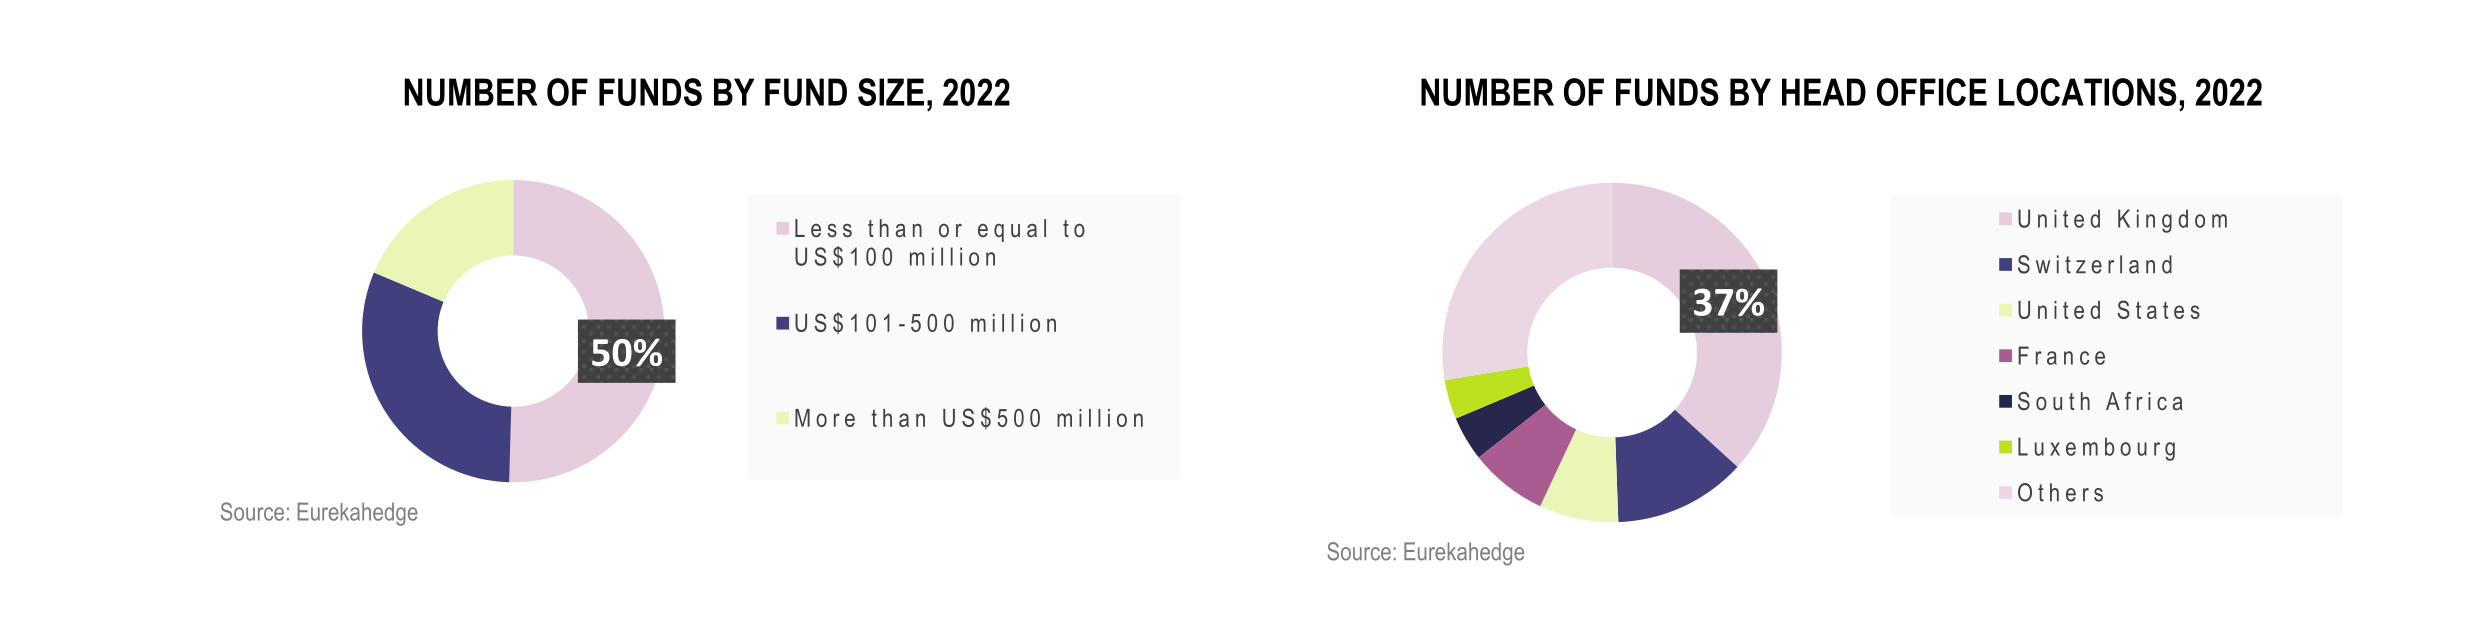 Global Hedge Funds Infographic May 2022 - funds by fund size and head office location